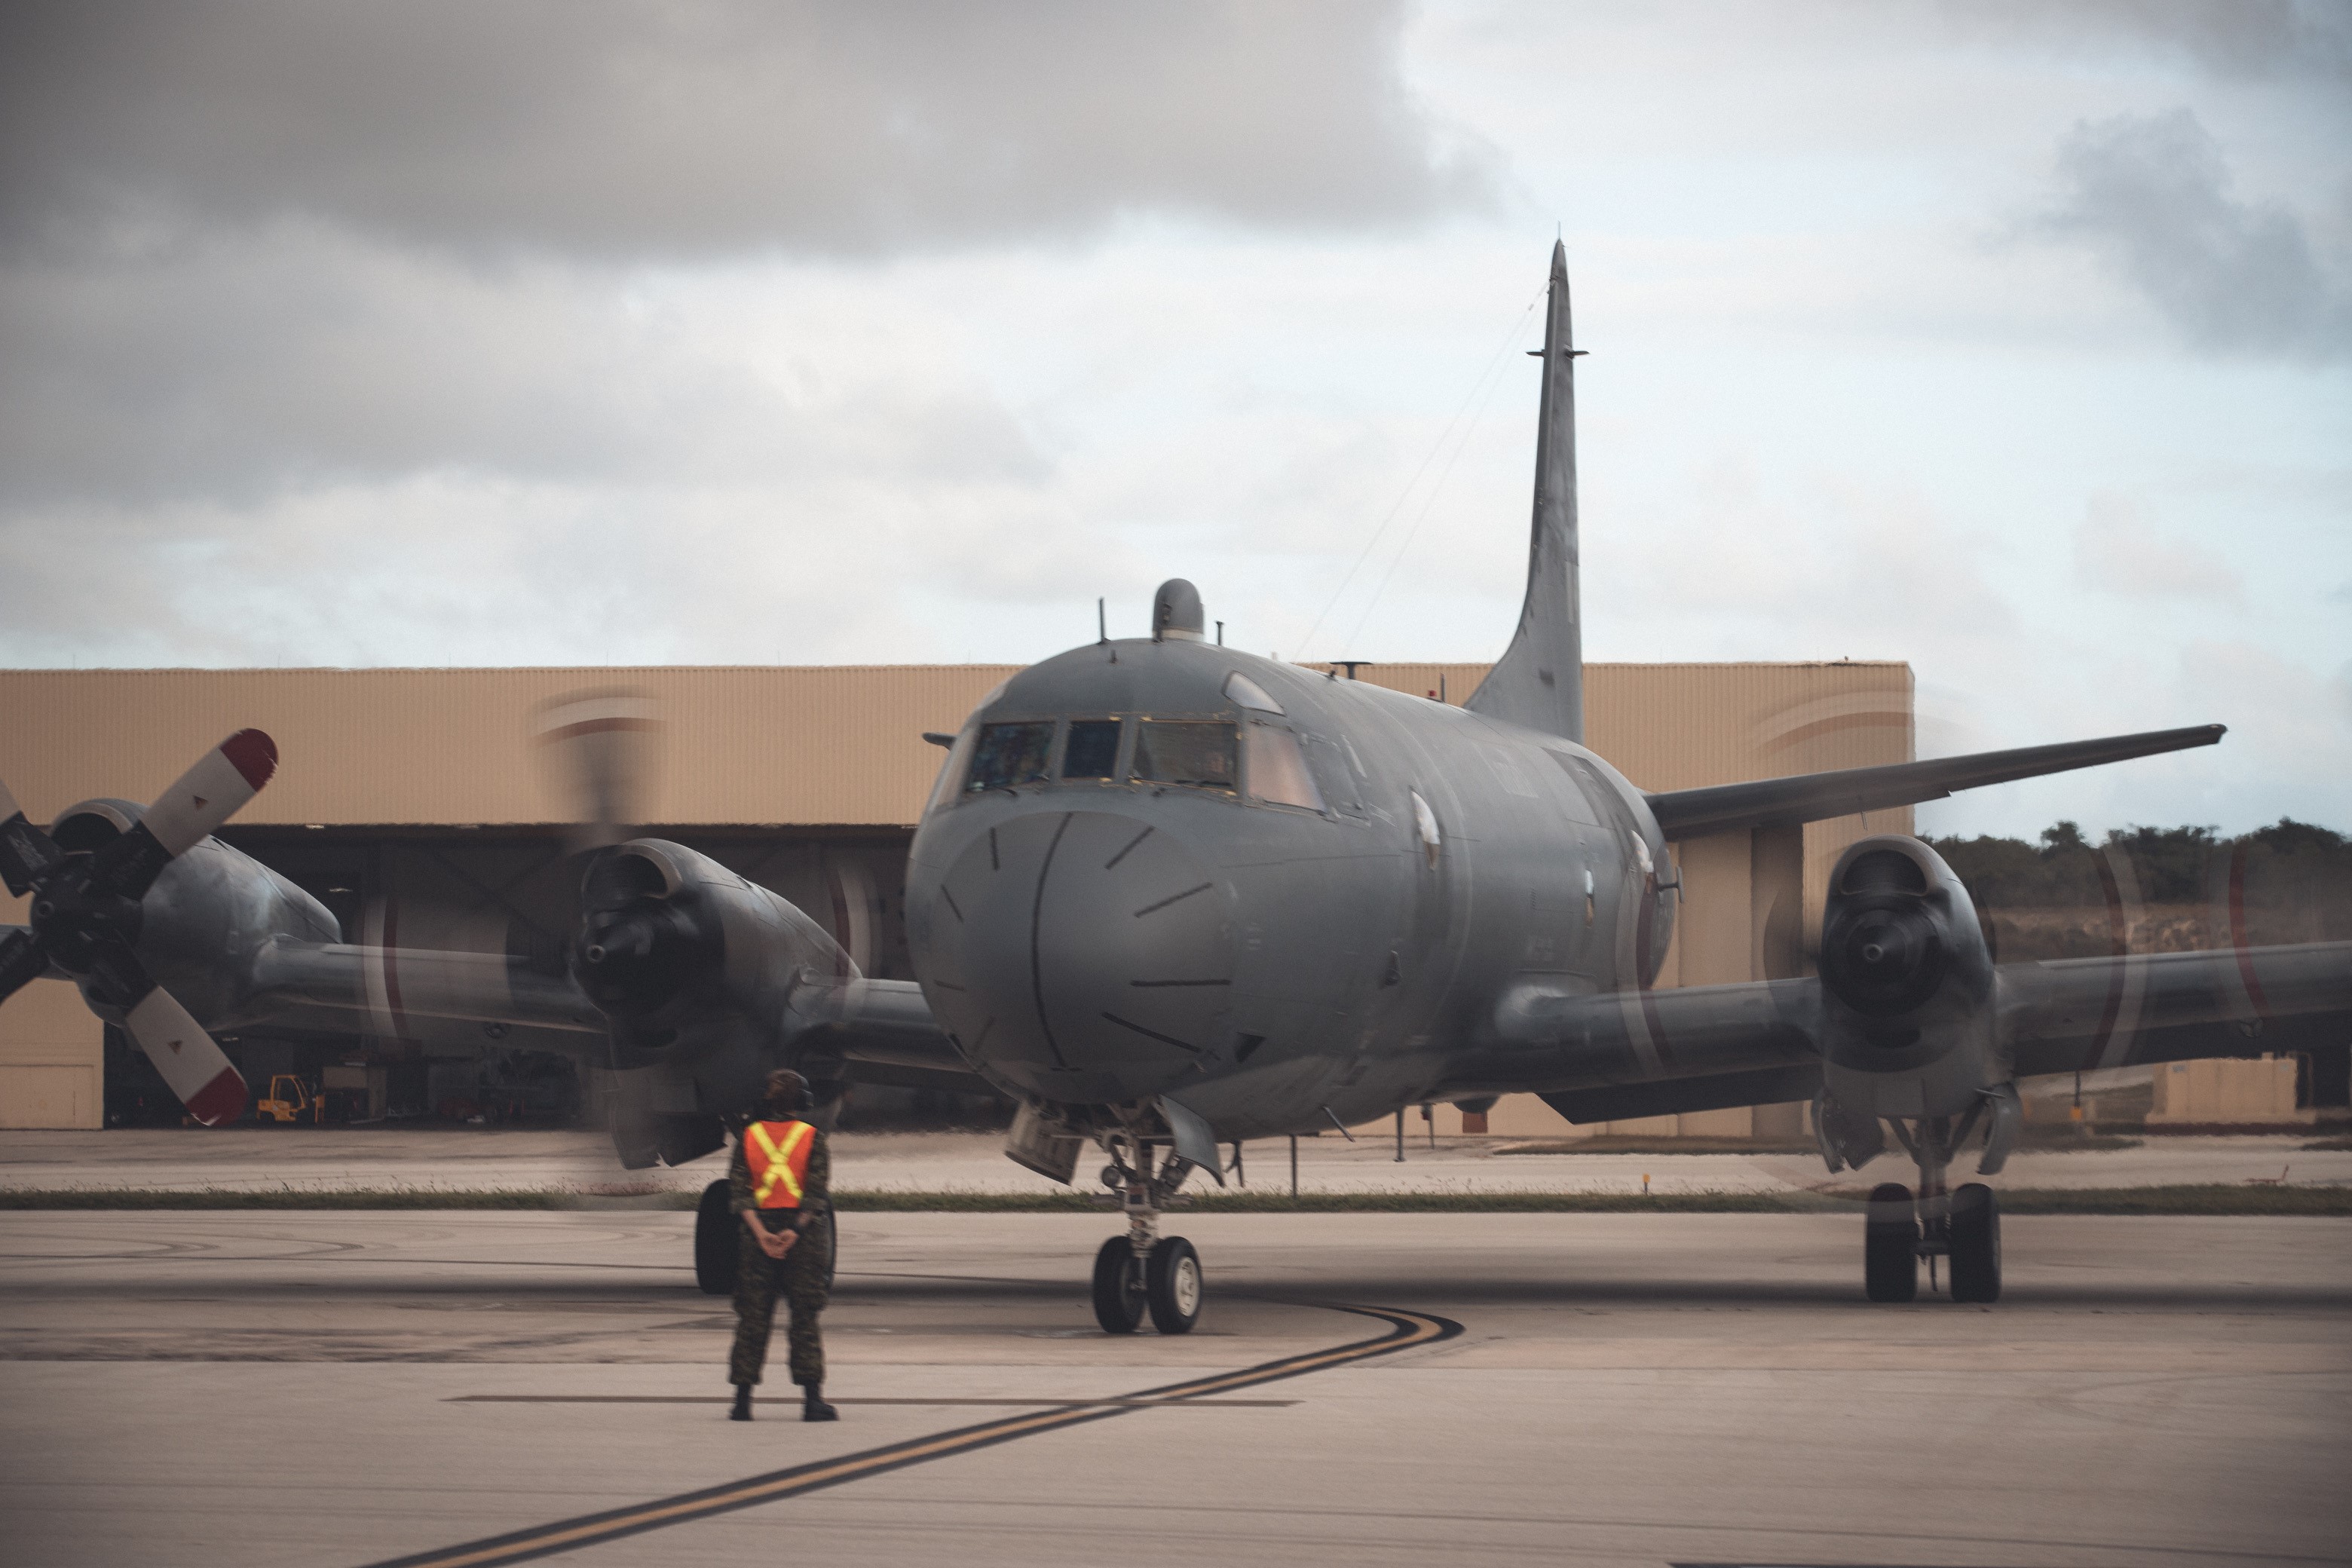 A Royal Canadian Air Force CP-140 Aurora aircraft from 407 Long Range Patrol Squadron prepares for a flight at Andersen Air Base, Guam, on 19 January 2021 during Exercise Sea Dragon, a multinational anti-submarine exercise hosted by the United States Navy. PHOTO: Petty Officer 1st Class Glenn Slaughter, United States Navy